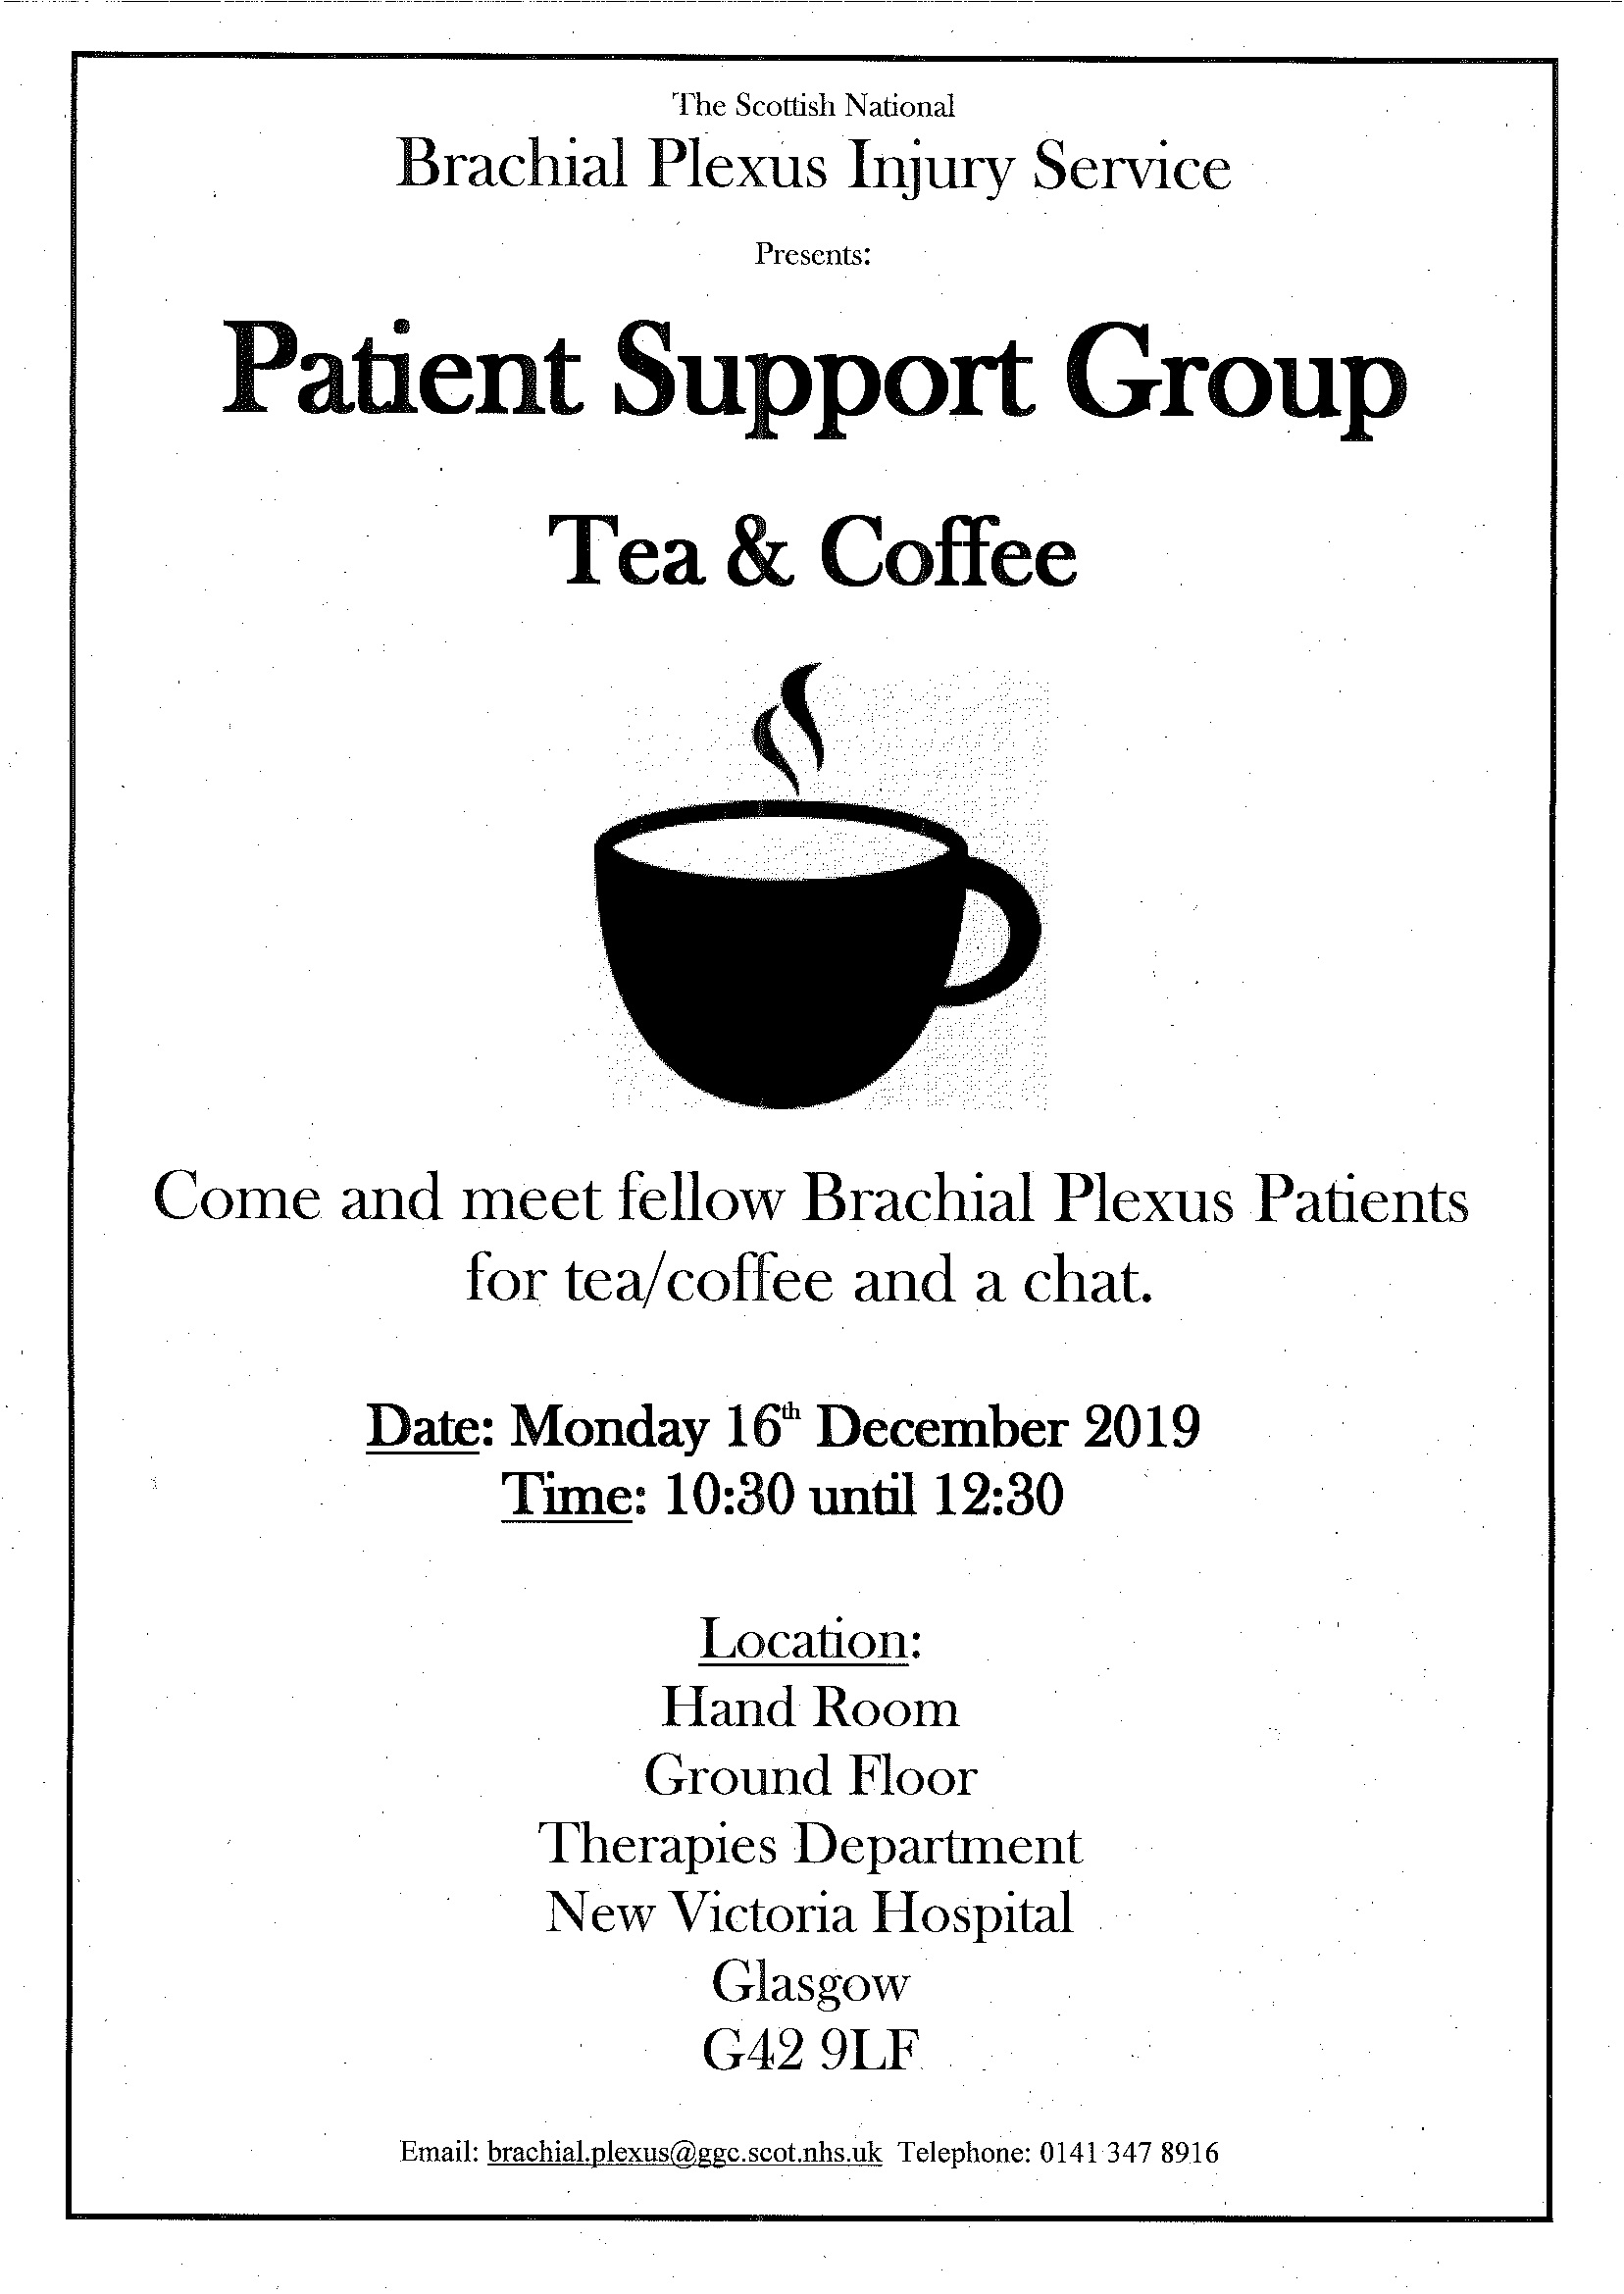 Patient Support Group Poster